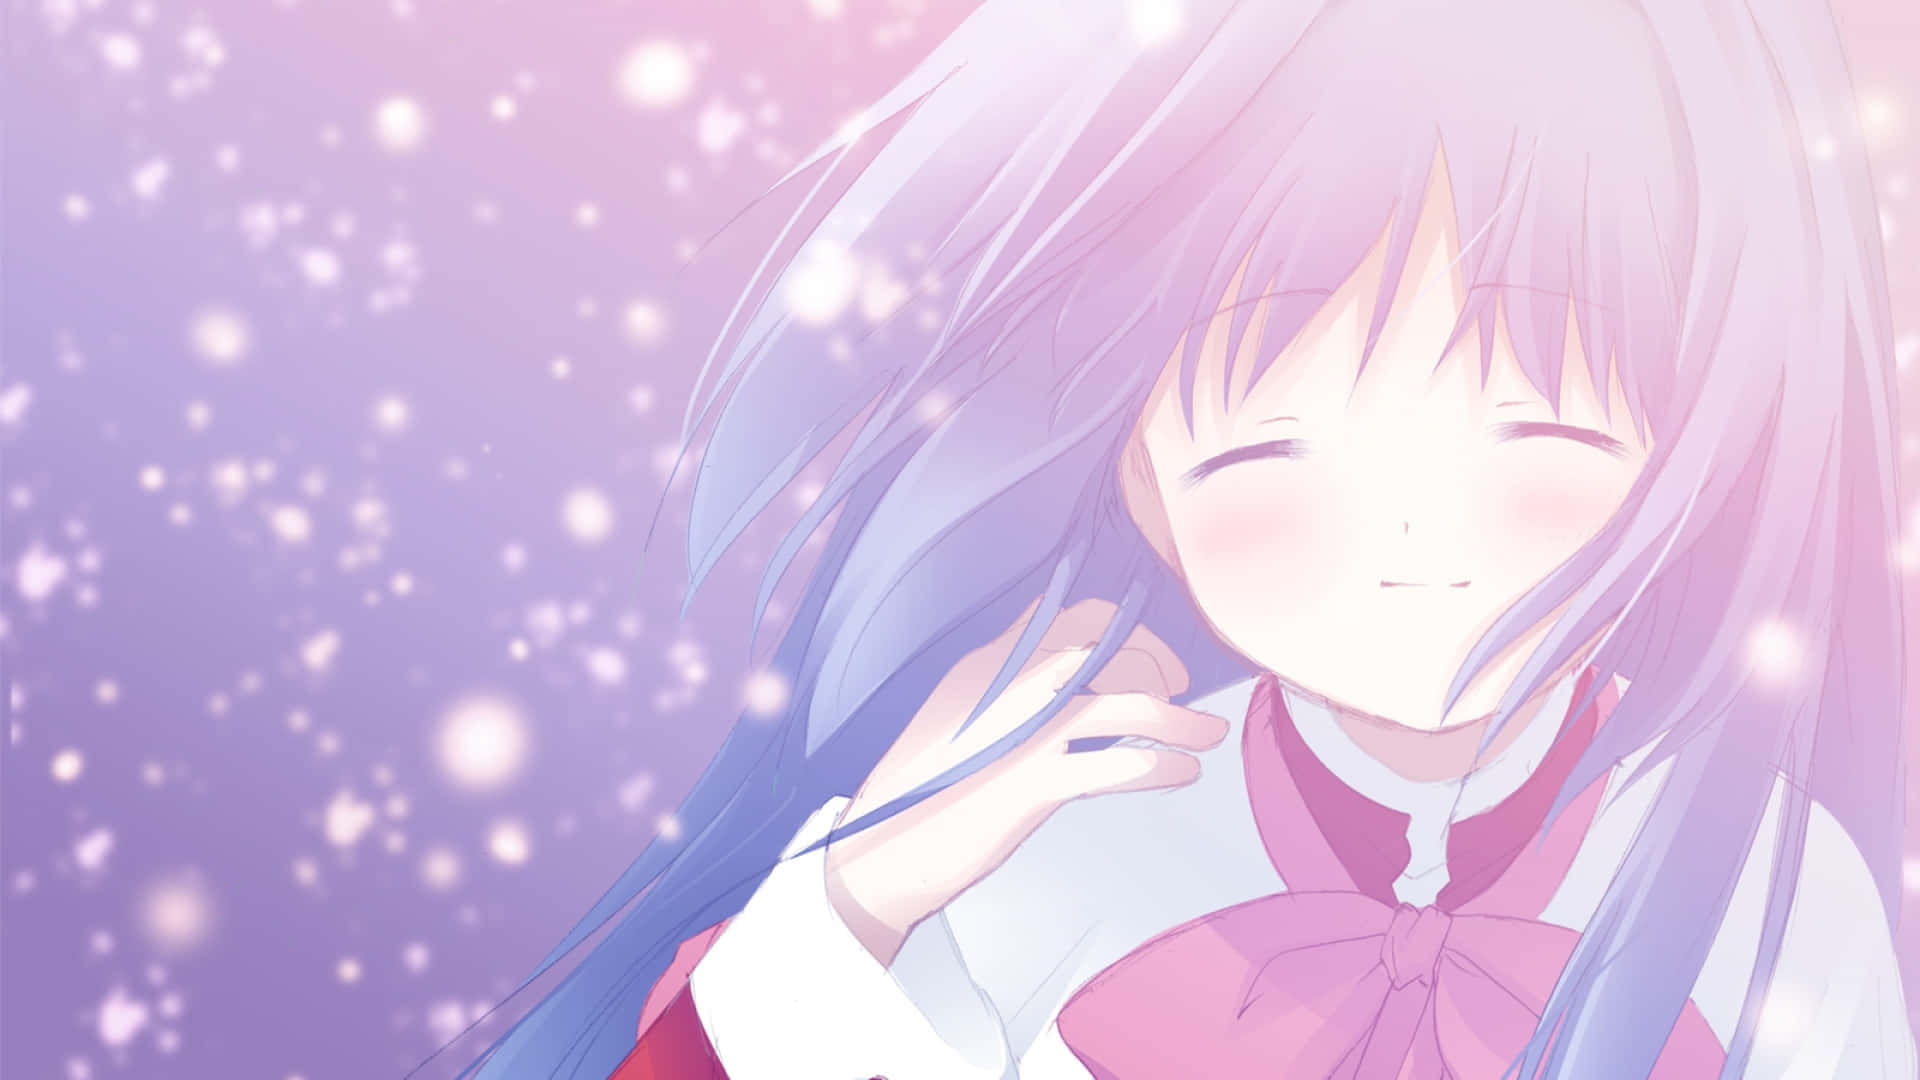 A still from the anime series, Kanon Wallpaper